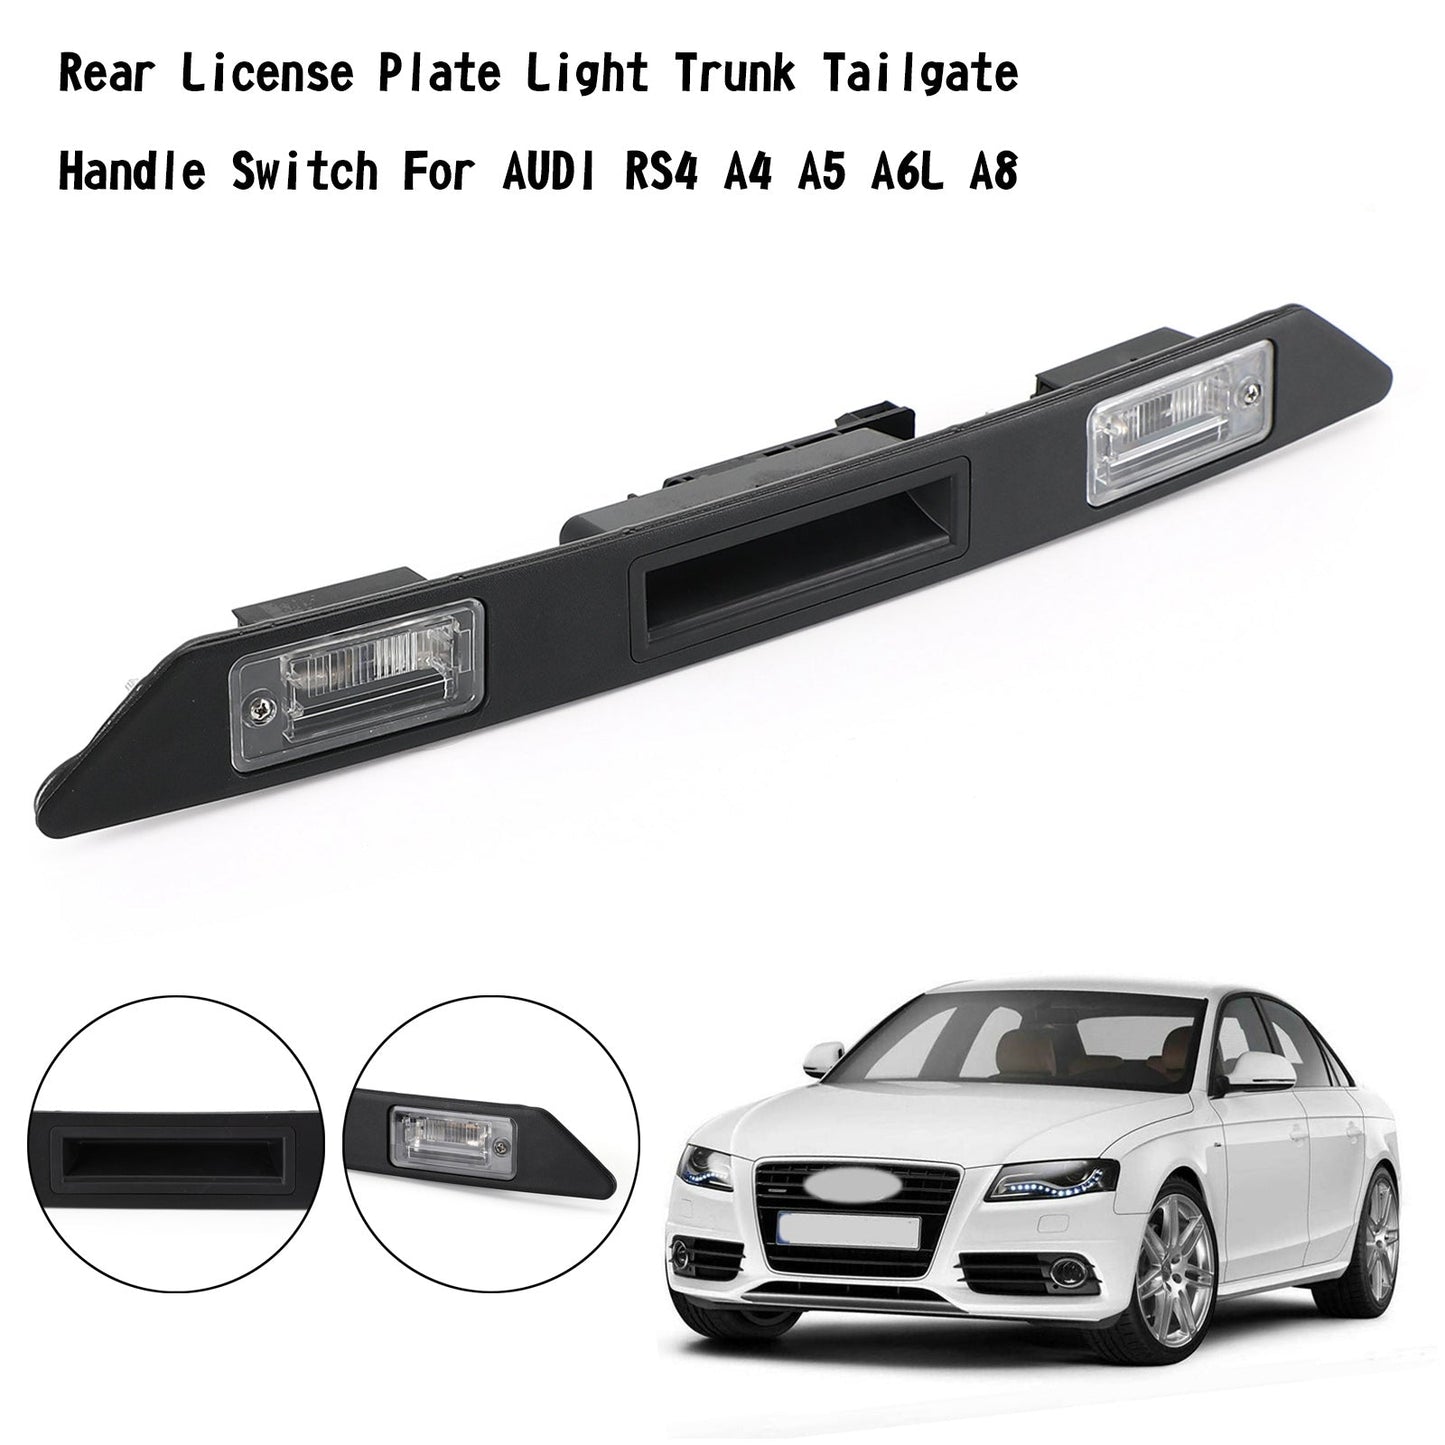 2004-2013 Audi A3/S3 Models Rear License Plate Light Trunk Tailgate Handle Switch 8P48275743FZ